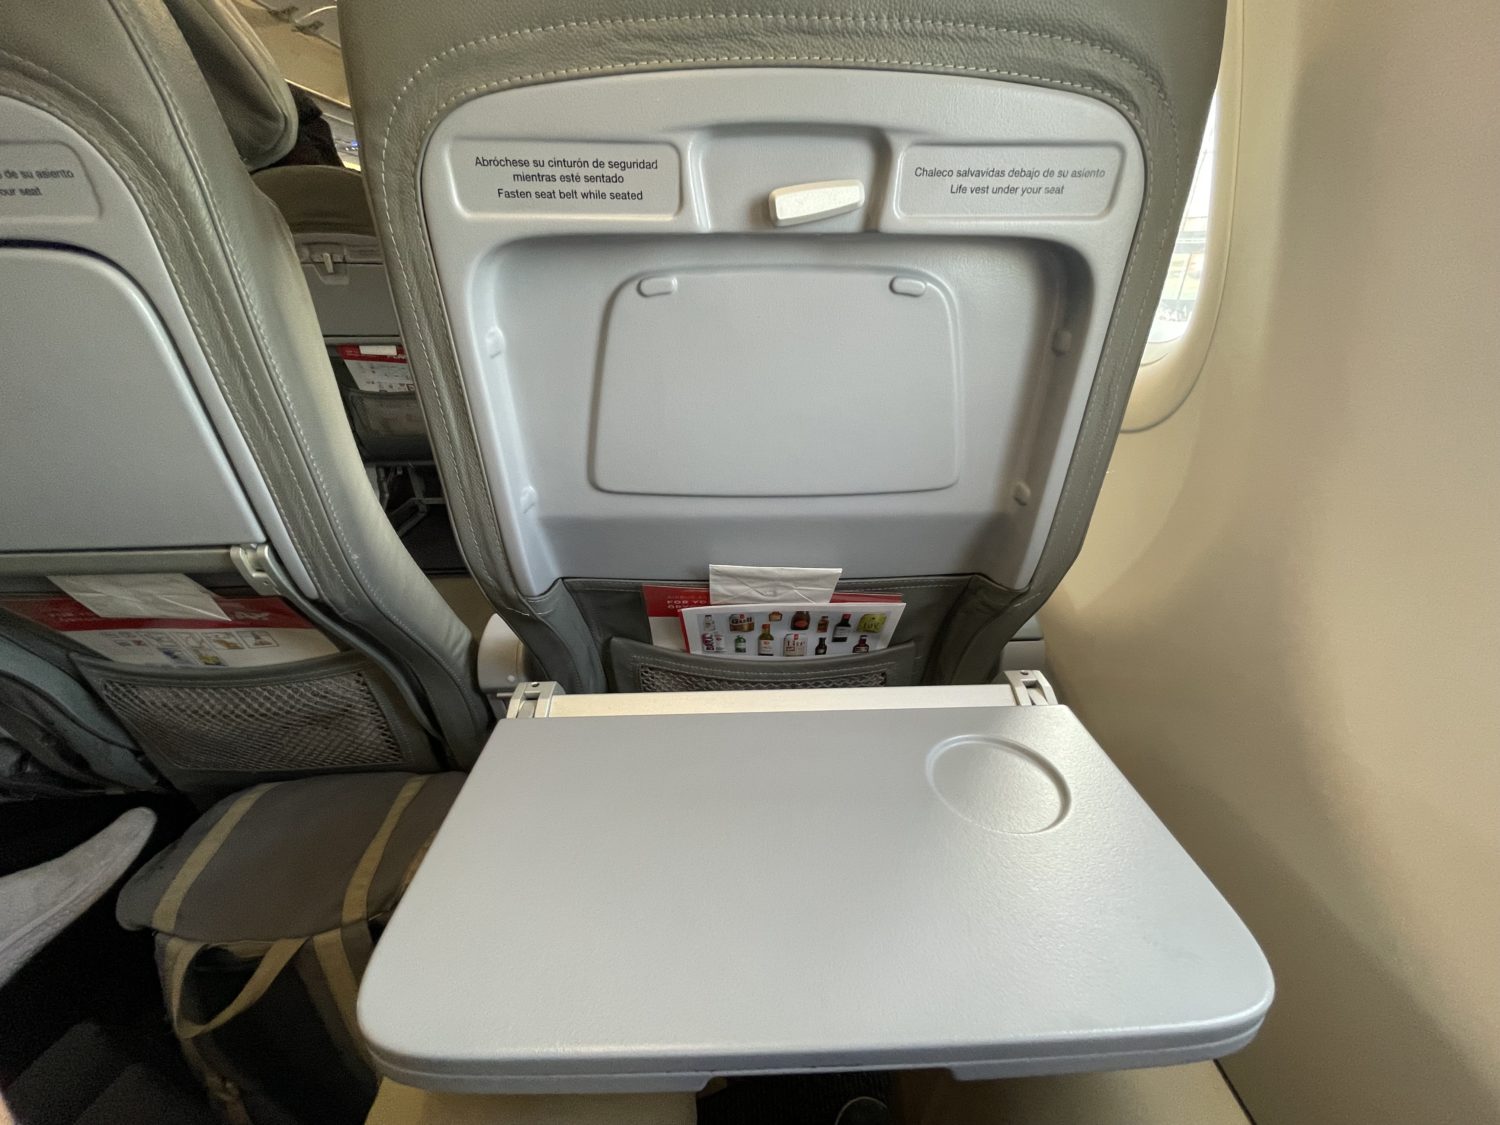 PLAY Airlines tray table